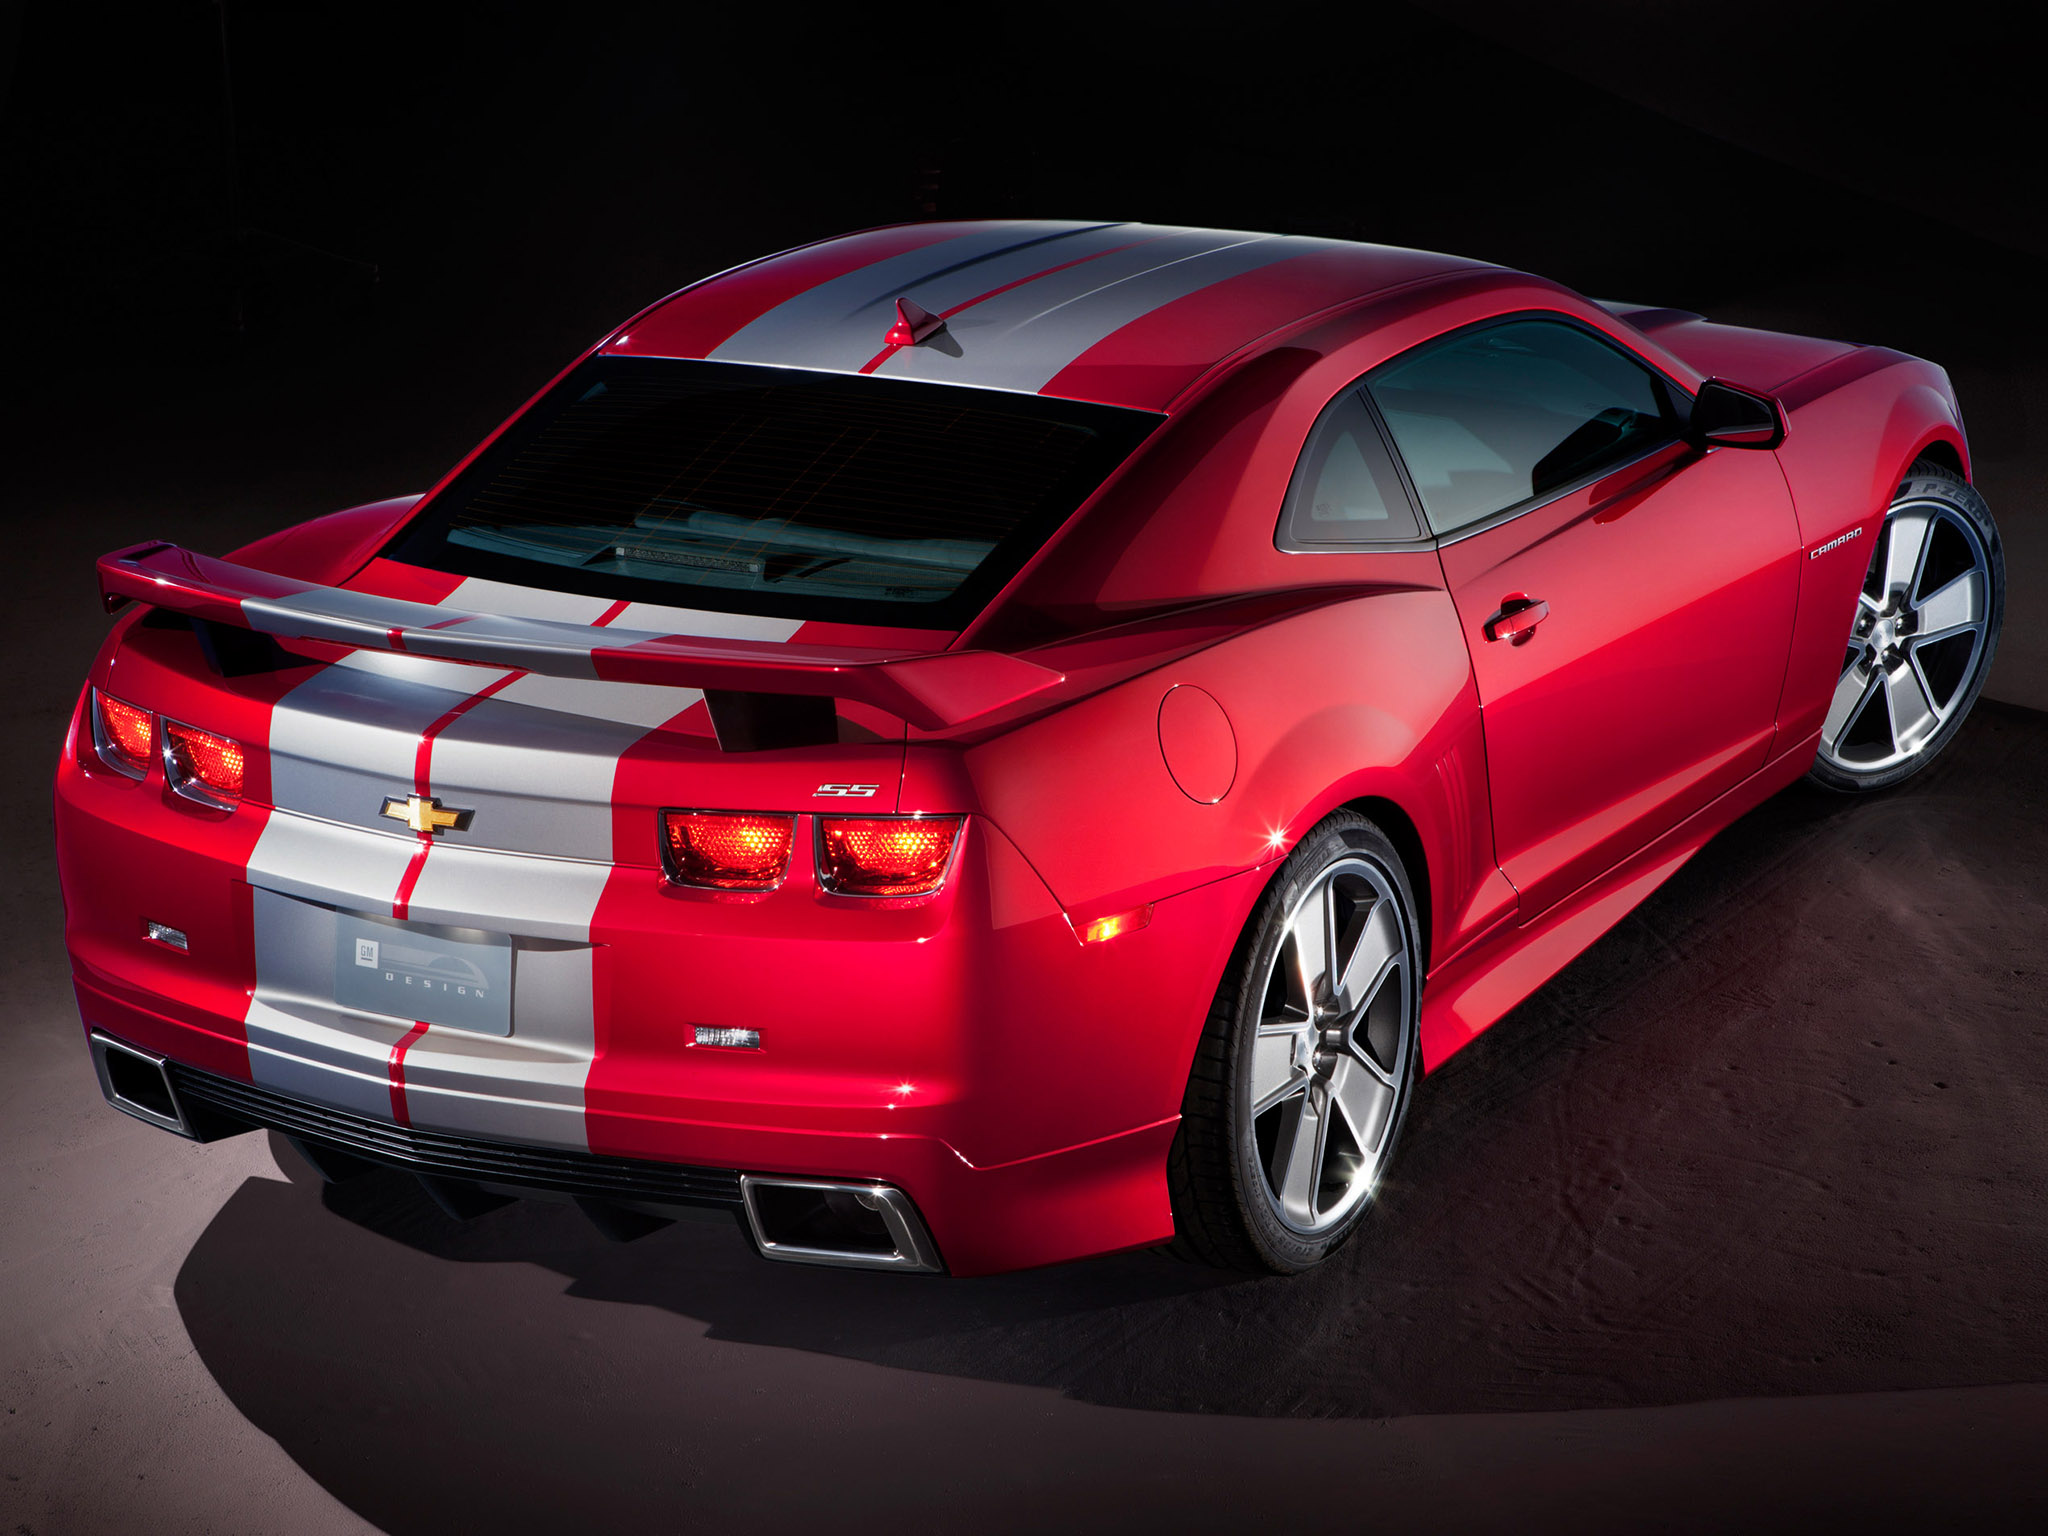 2010, Chevrolet, Camaro, Red, Flash, Concept, Muscle Wallpaper